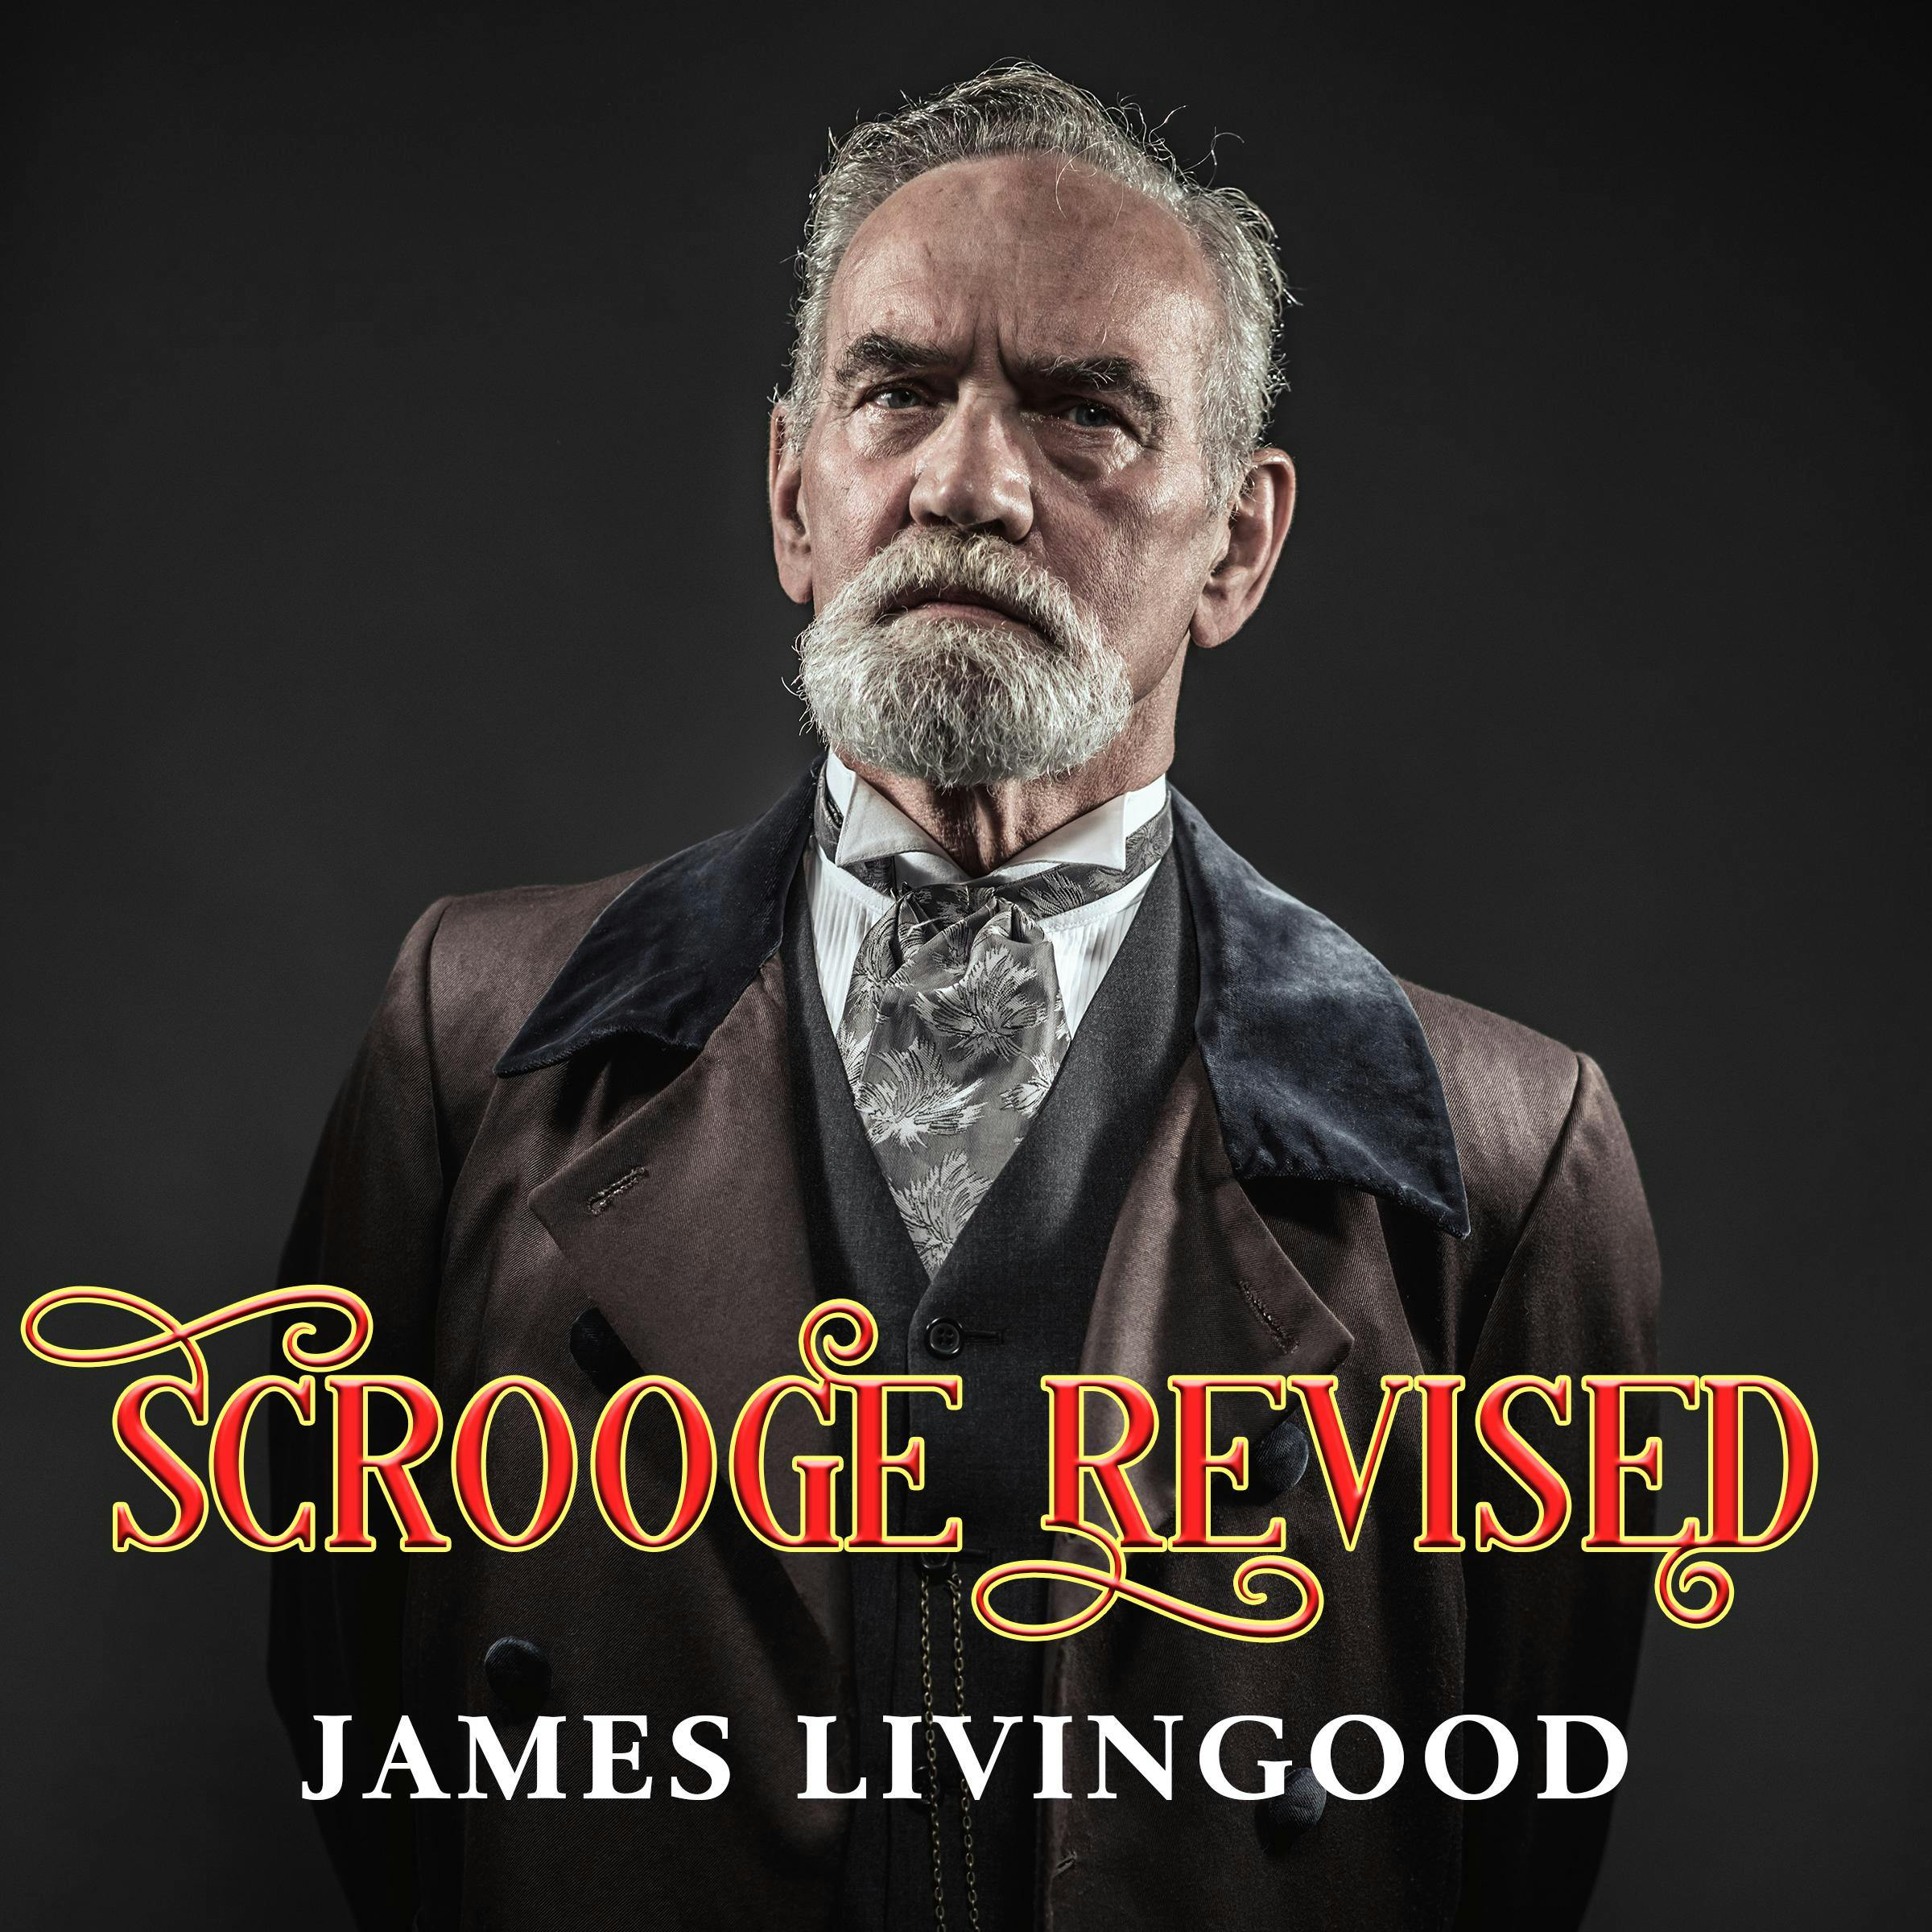 Scrooge Revised: A Christmas Fiction Based on the Classic - James Livingood